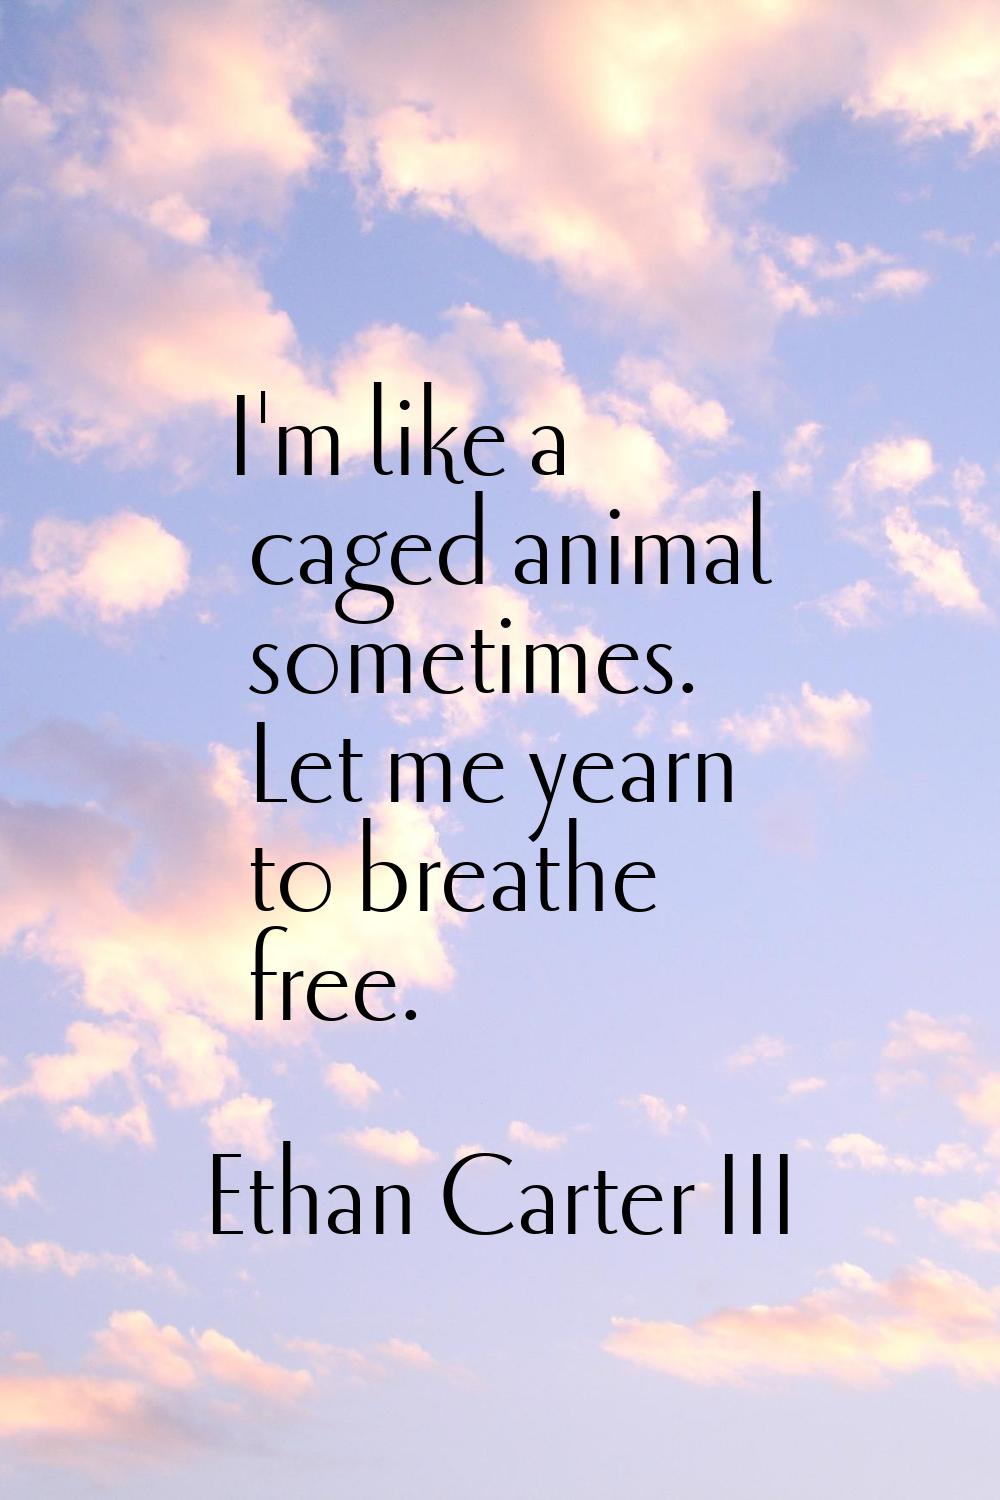 I'm like a caged animal sometimes. Let me yearn to breathe free.